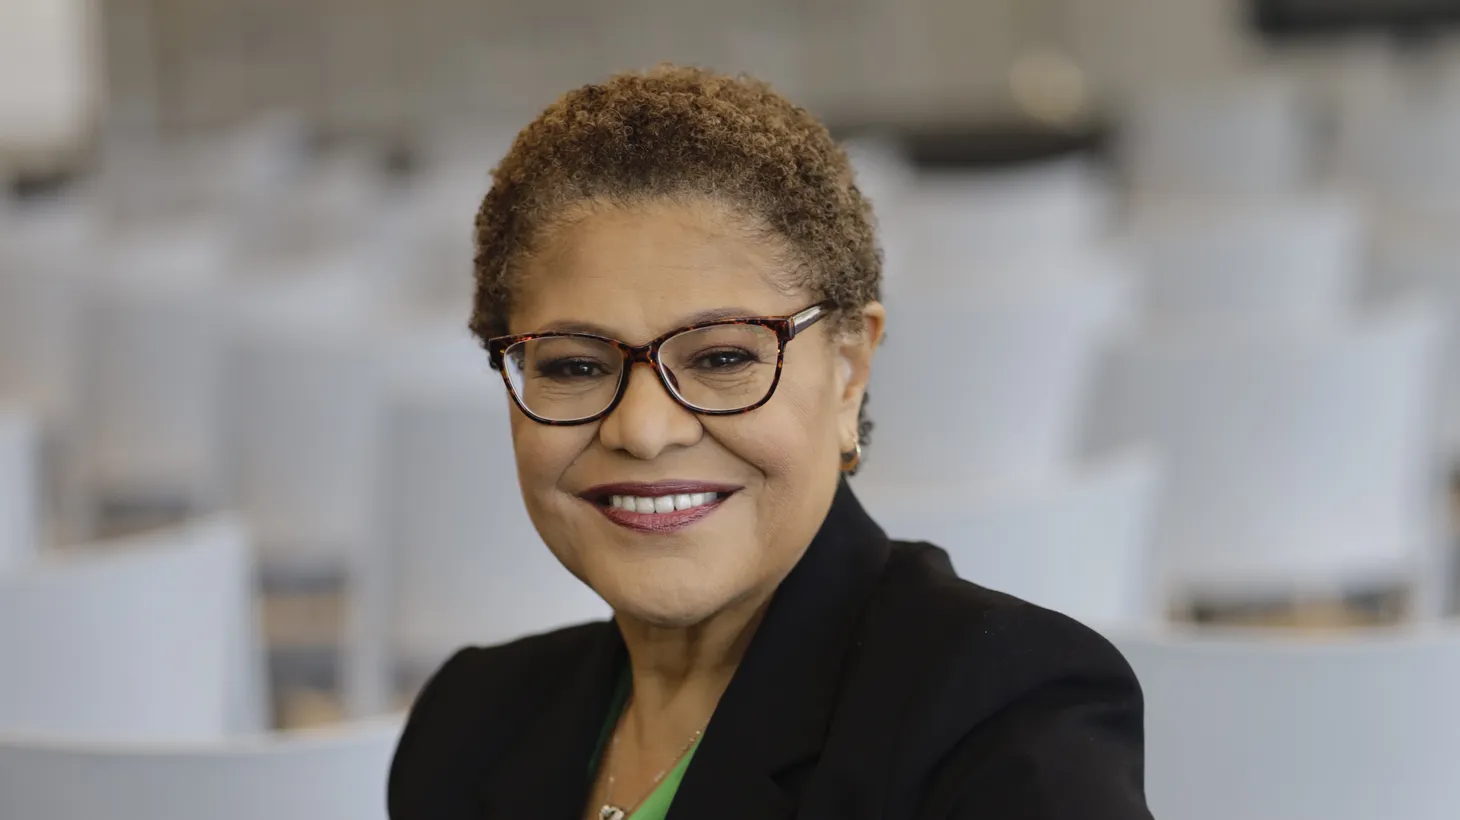 “It is not solving [homelessness] to criminalize people, even if you are so fed up that you have no more empathy. If you lead to a strategy like that, you might lock somebody up in city jail. They might be there for three days, and they'll be right back on the street,” says U.S. Congresswoman Karen Bass.